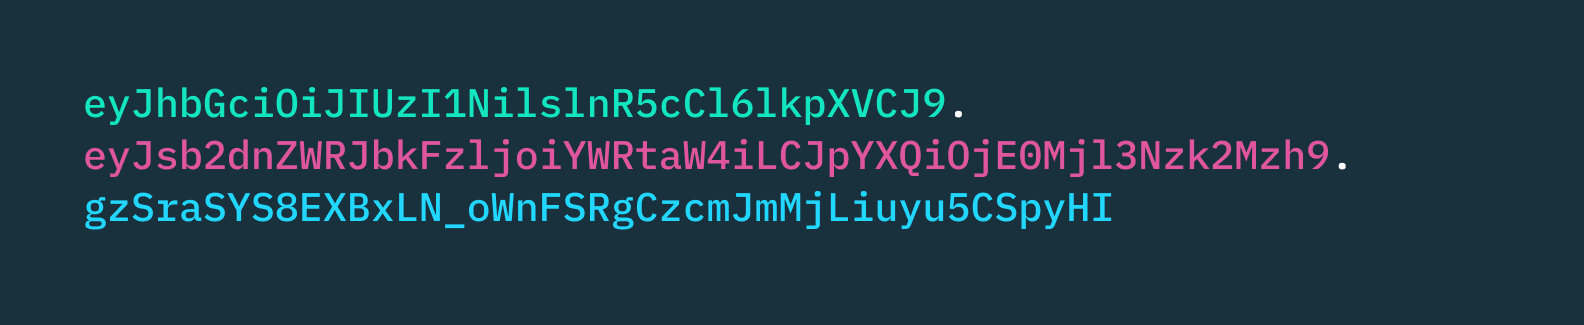 a code snippet of a JWT